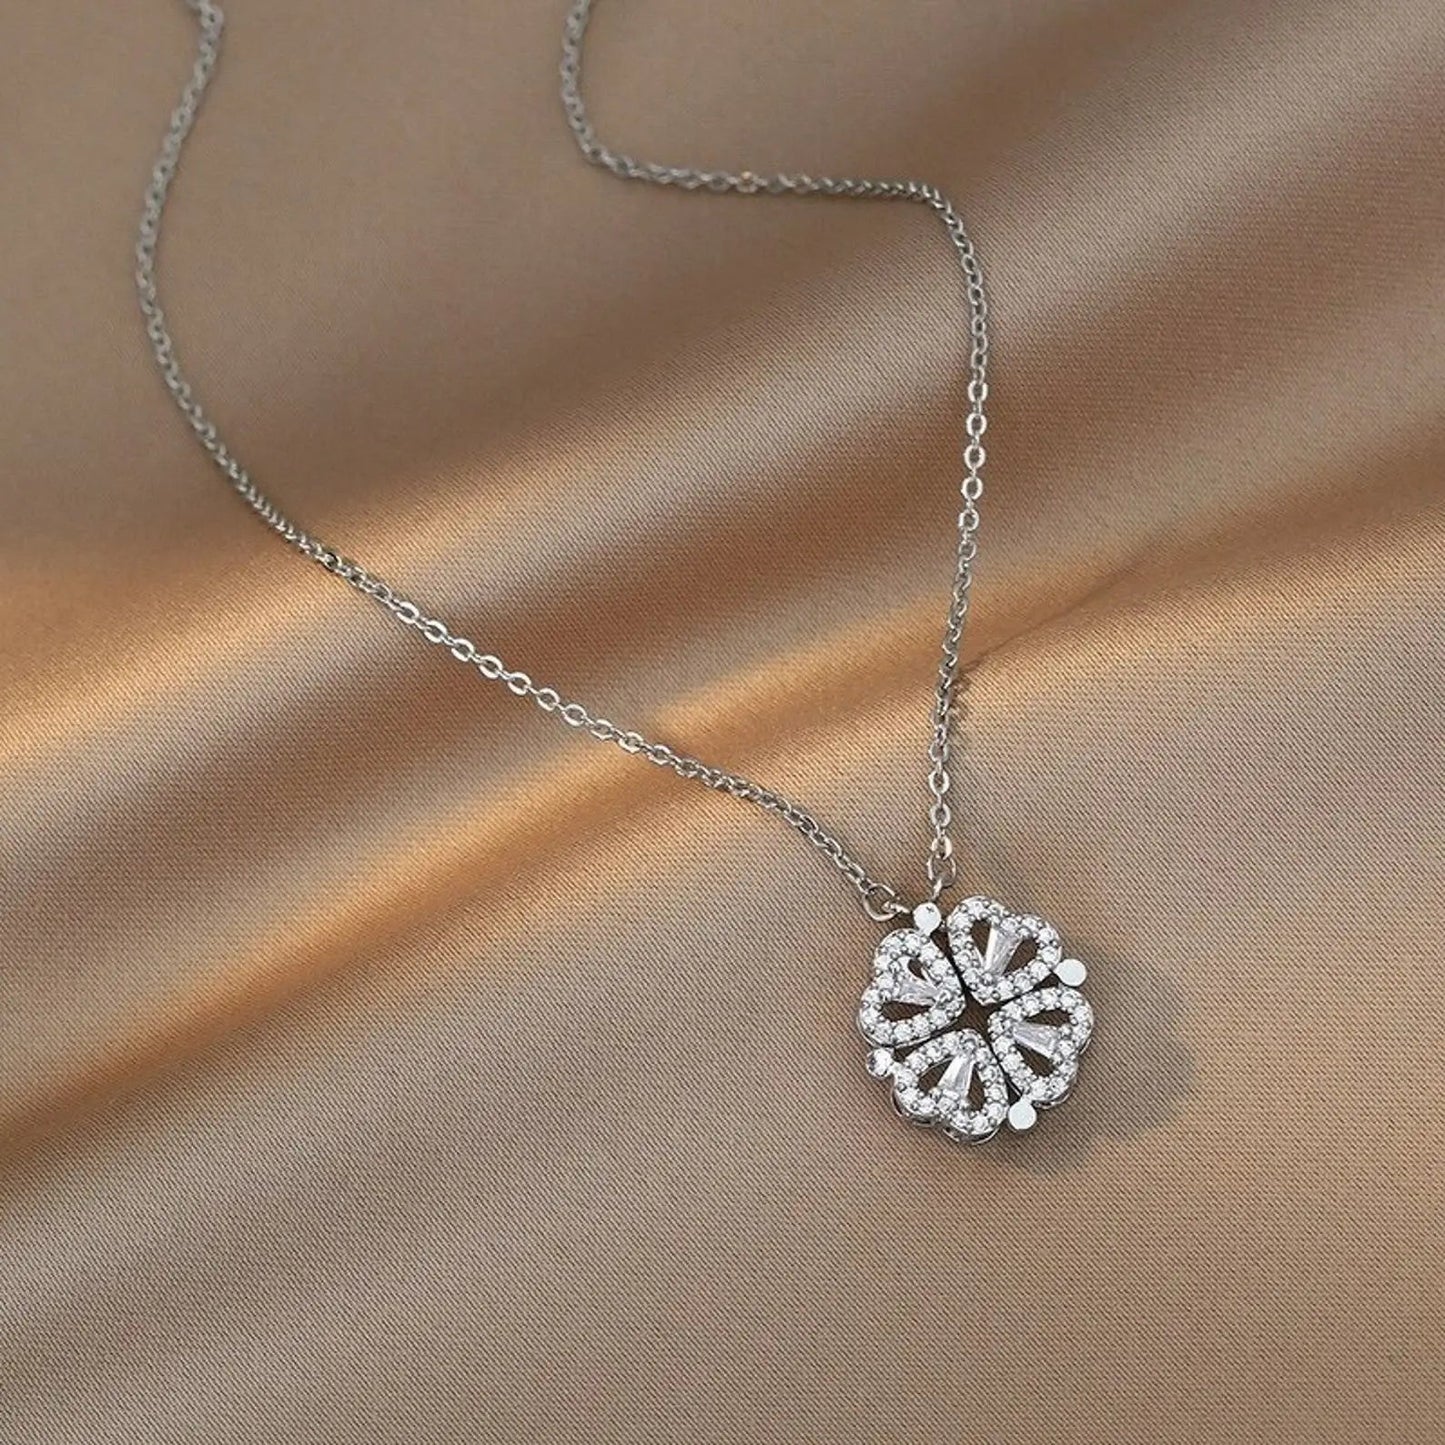 2-in-1 Four-Leaf Clover Necklace